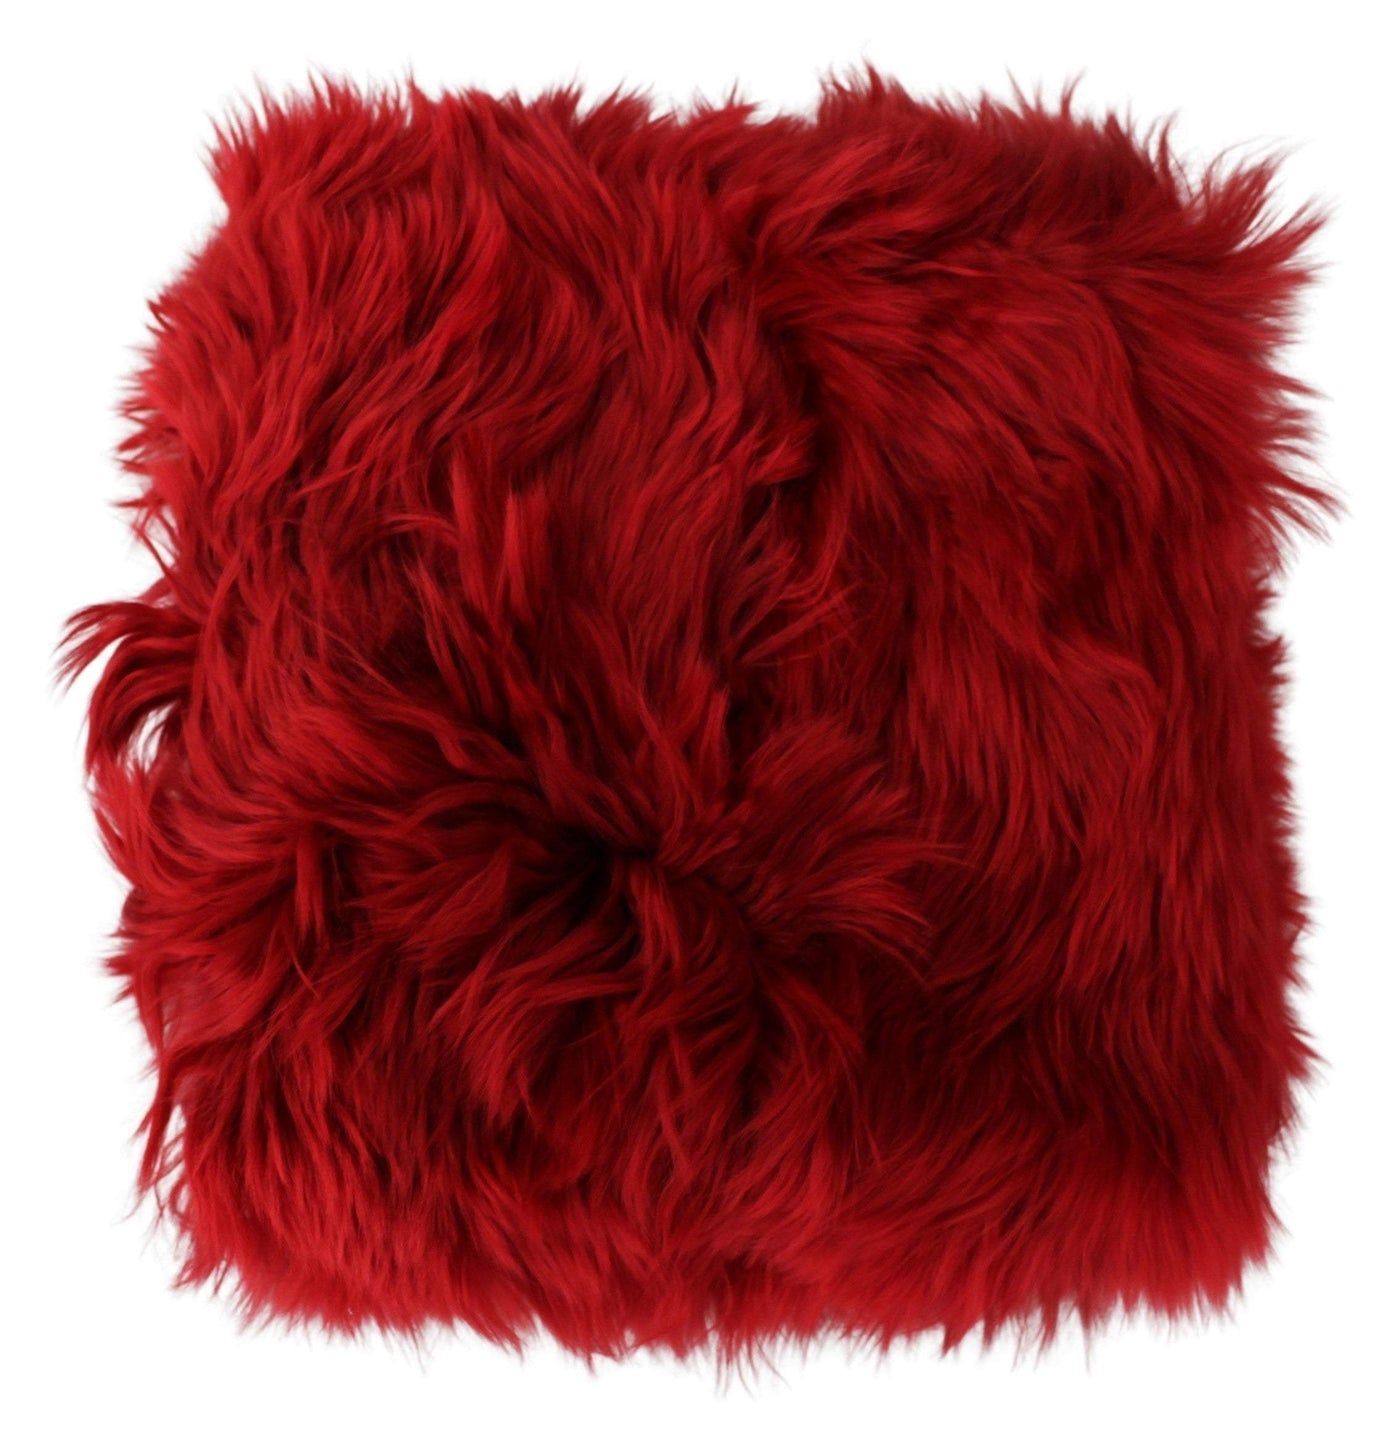 Dolce & Gabbana Red Alpaca Leather Fur Neck Wrap Shawl Scarf #women, Accessories - New Arrivals, Dolce & Gabbana, feed-agegroup-adult, feed-color-red, feed-gender-female, feed-size-OS, Gender_Women, Red, Scarves - Women - Accessories at SEYMAYKA